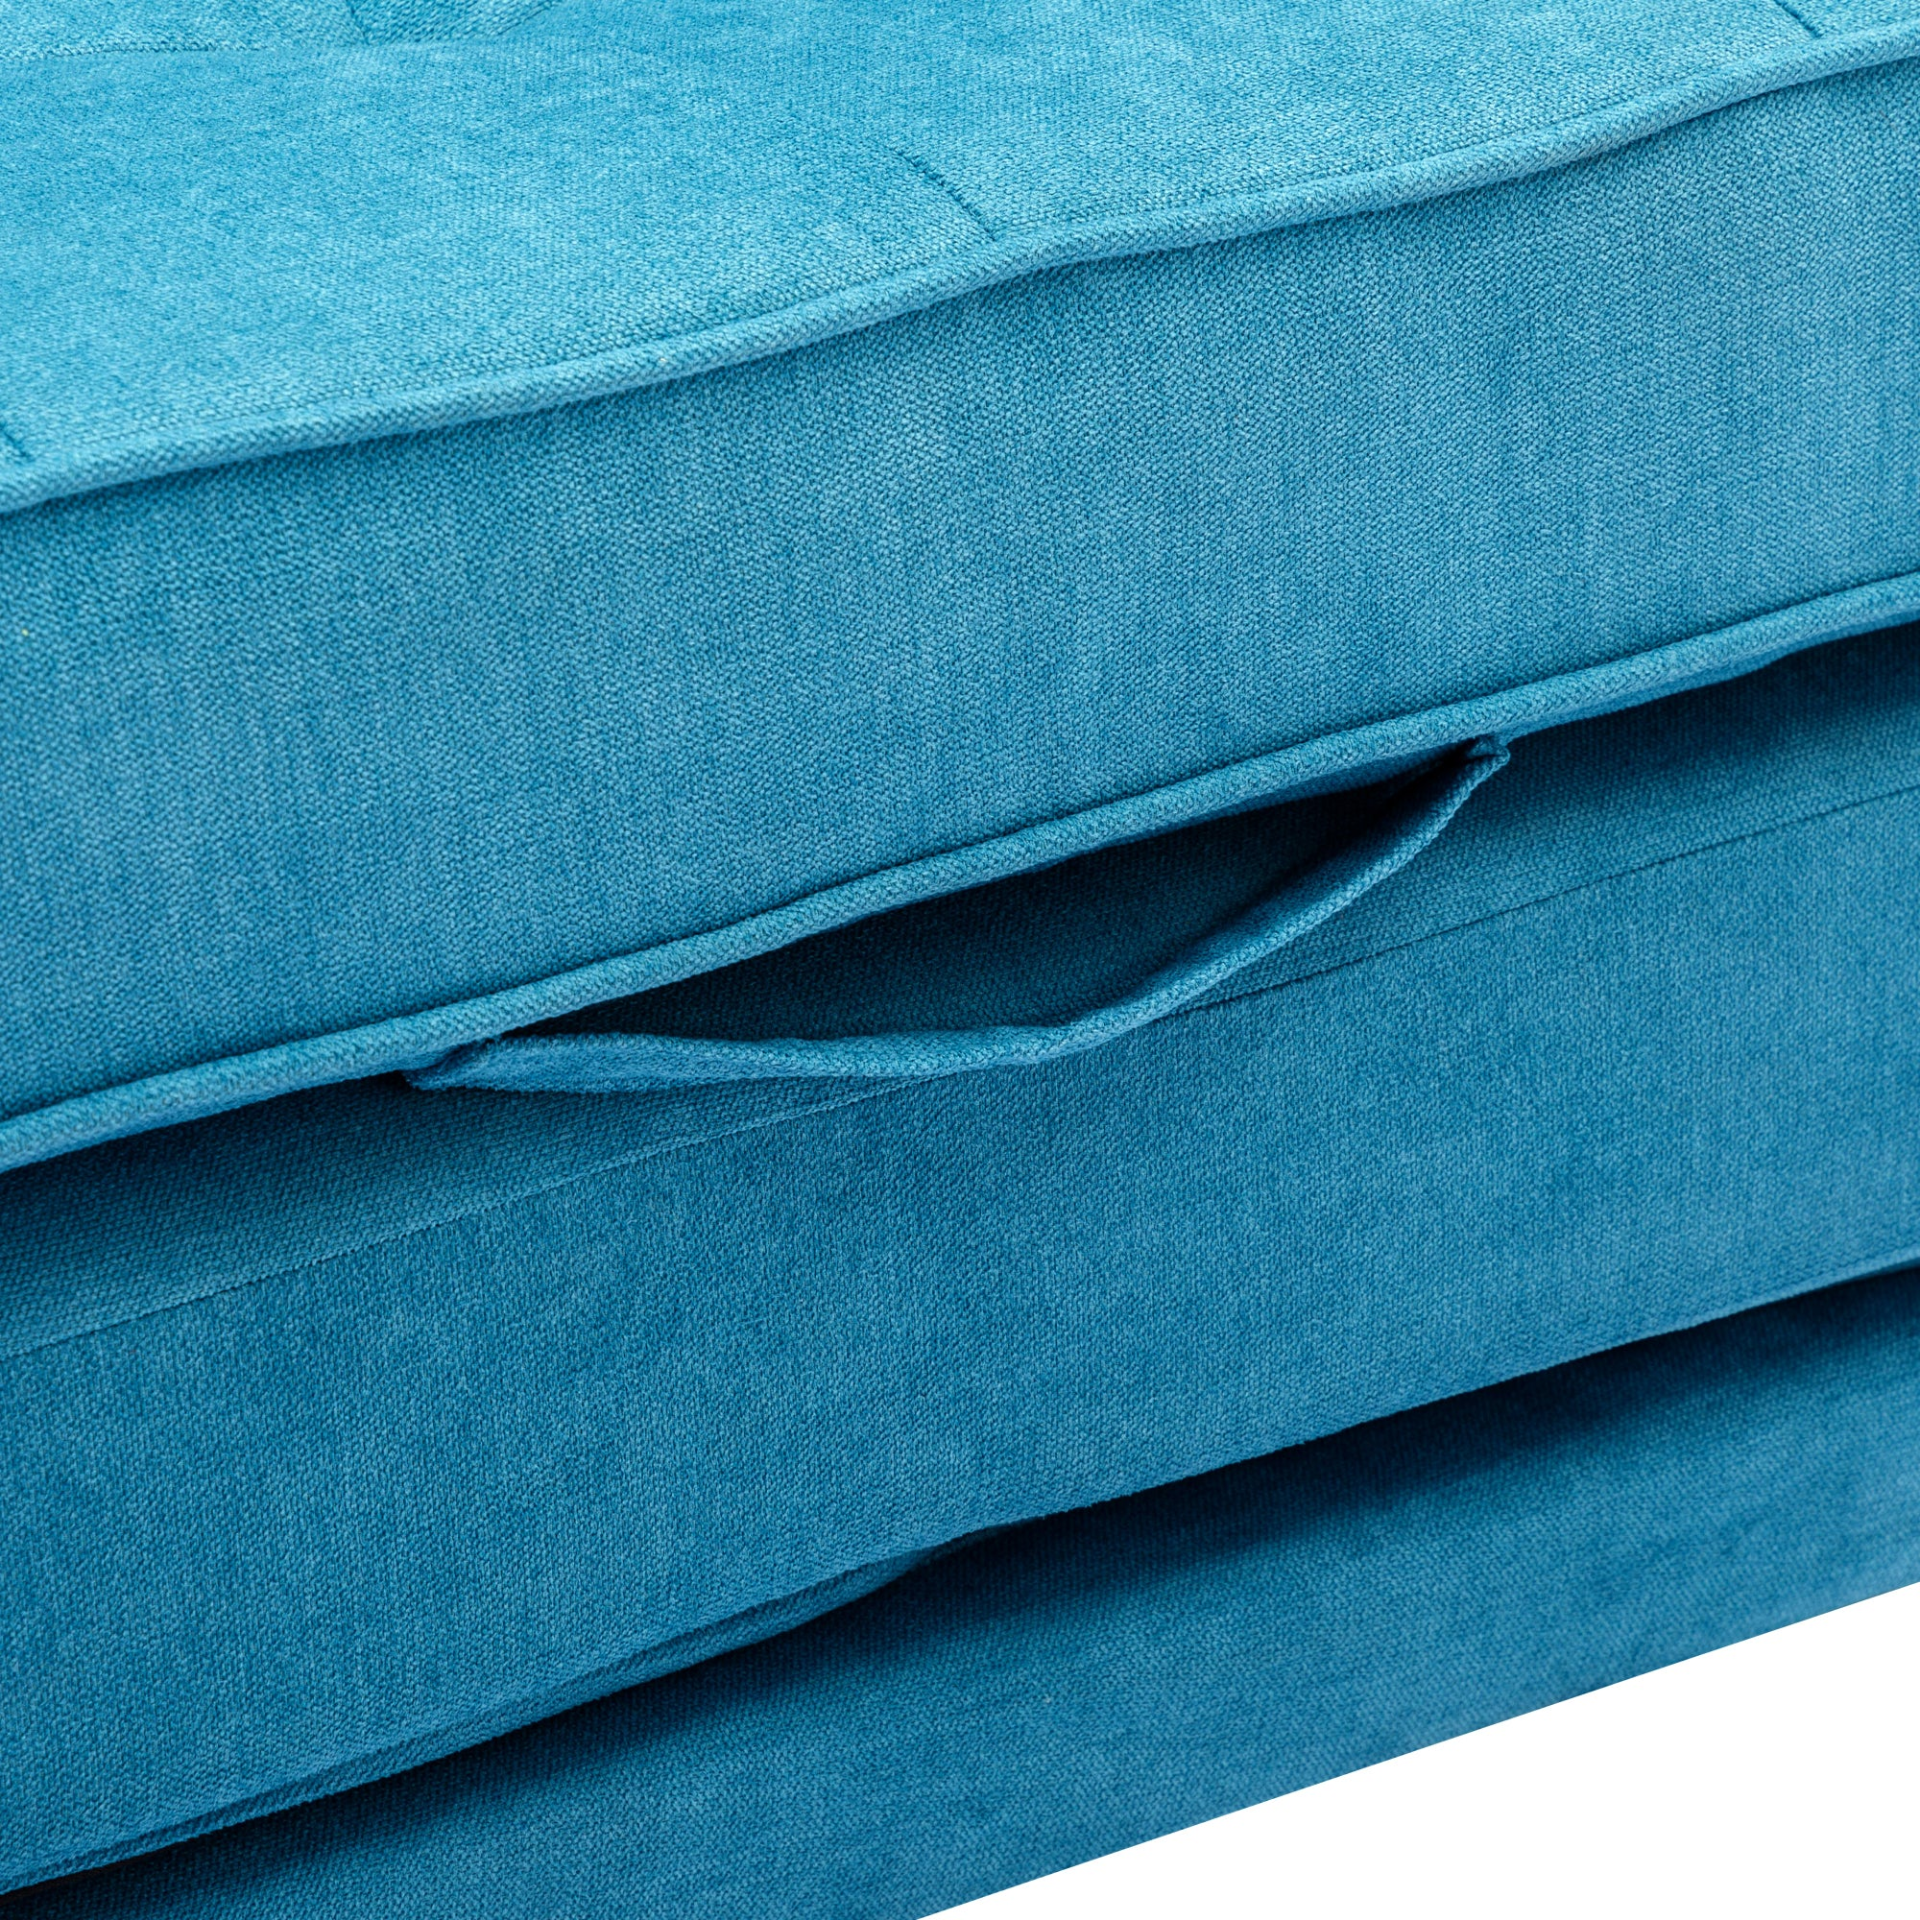 Bright Blue - Contemporary Loveseat Style Sofa with Pull-Out Bed (59")